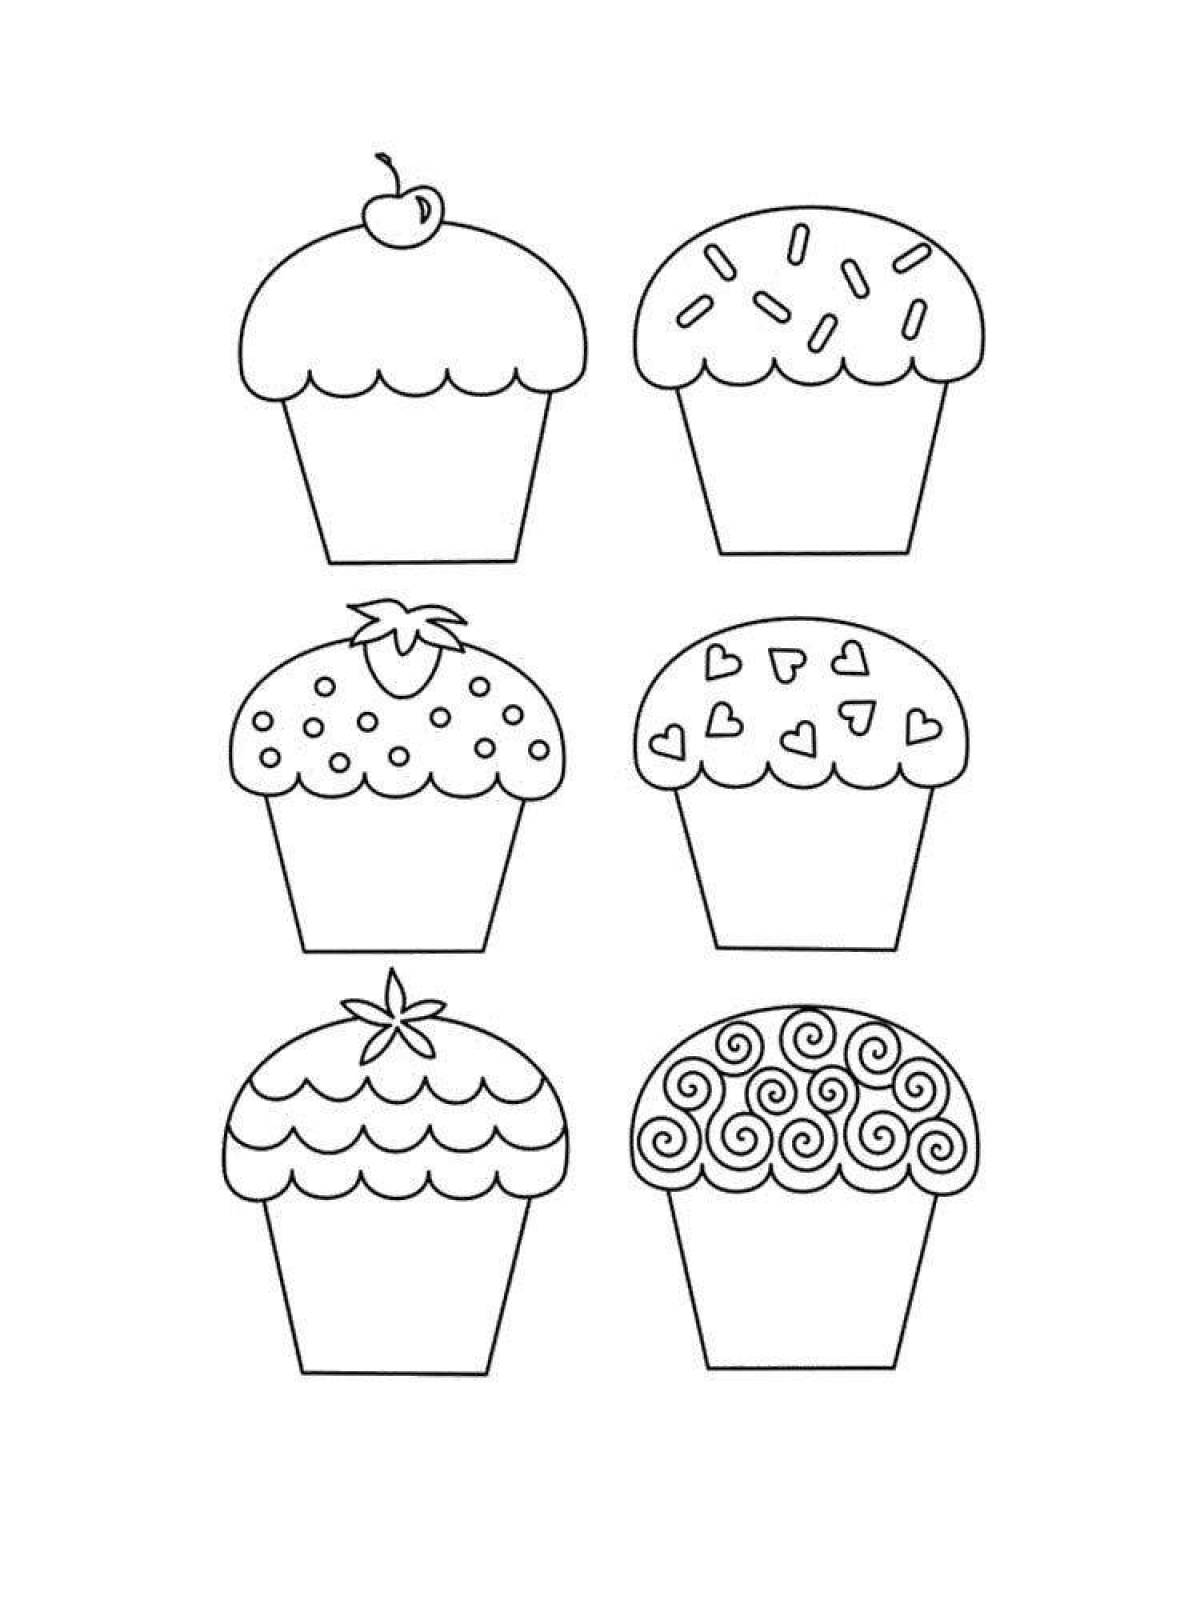 Fancy cupcake coloring pages for kids